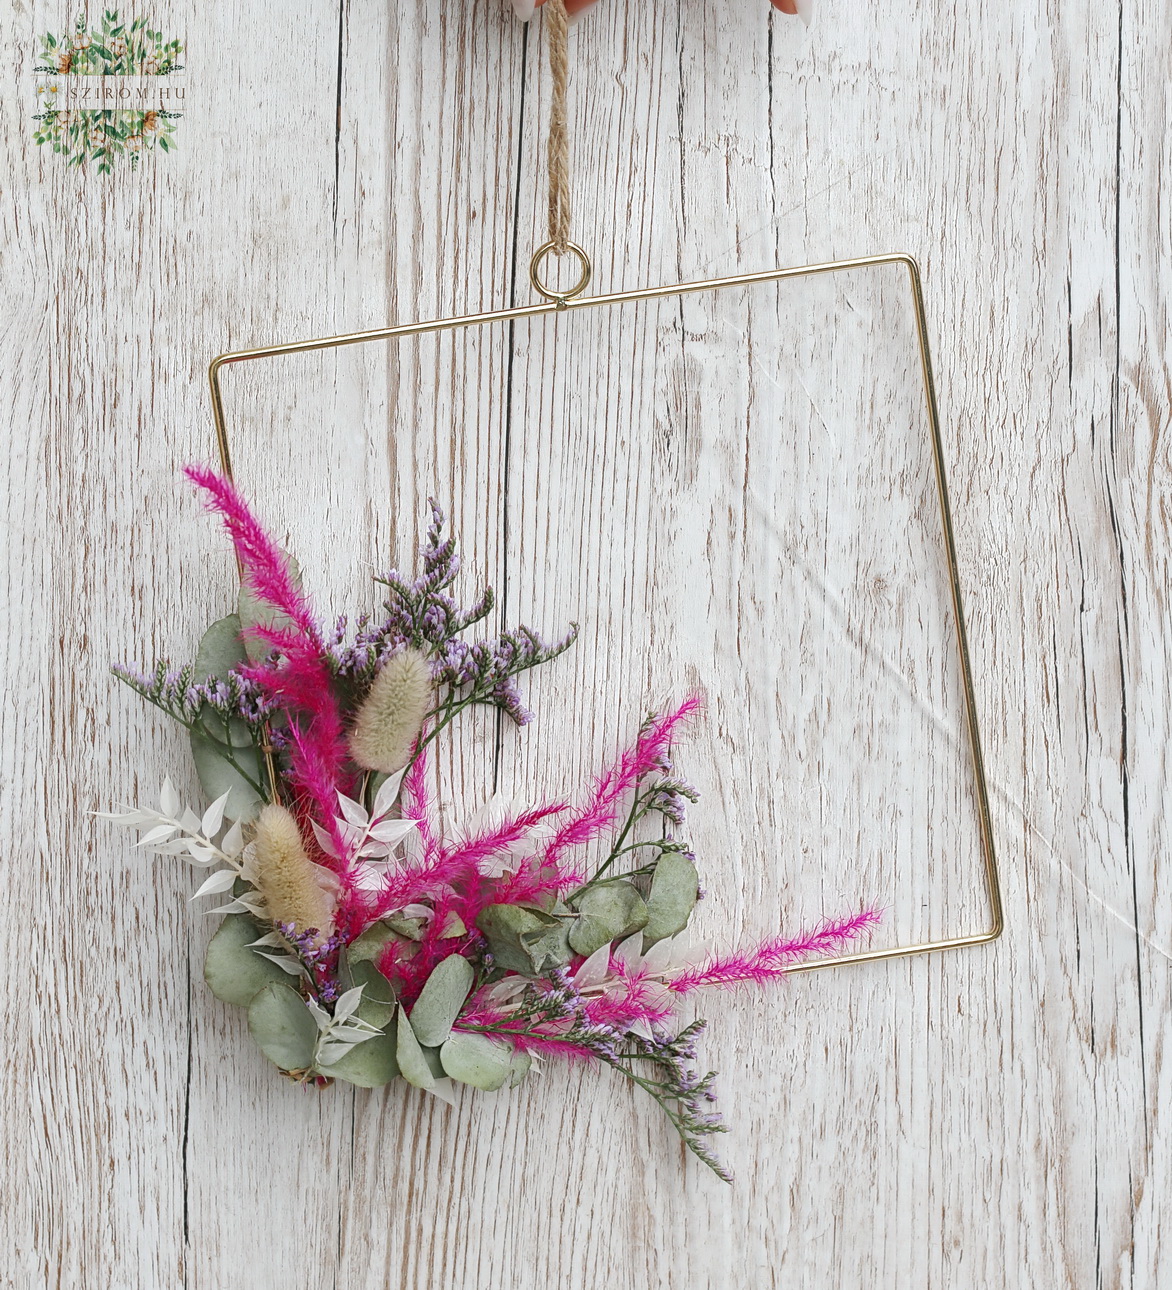 flower delivery Budapest - Dried flower ornament, 20cm